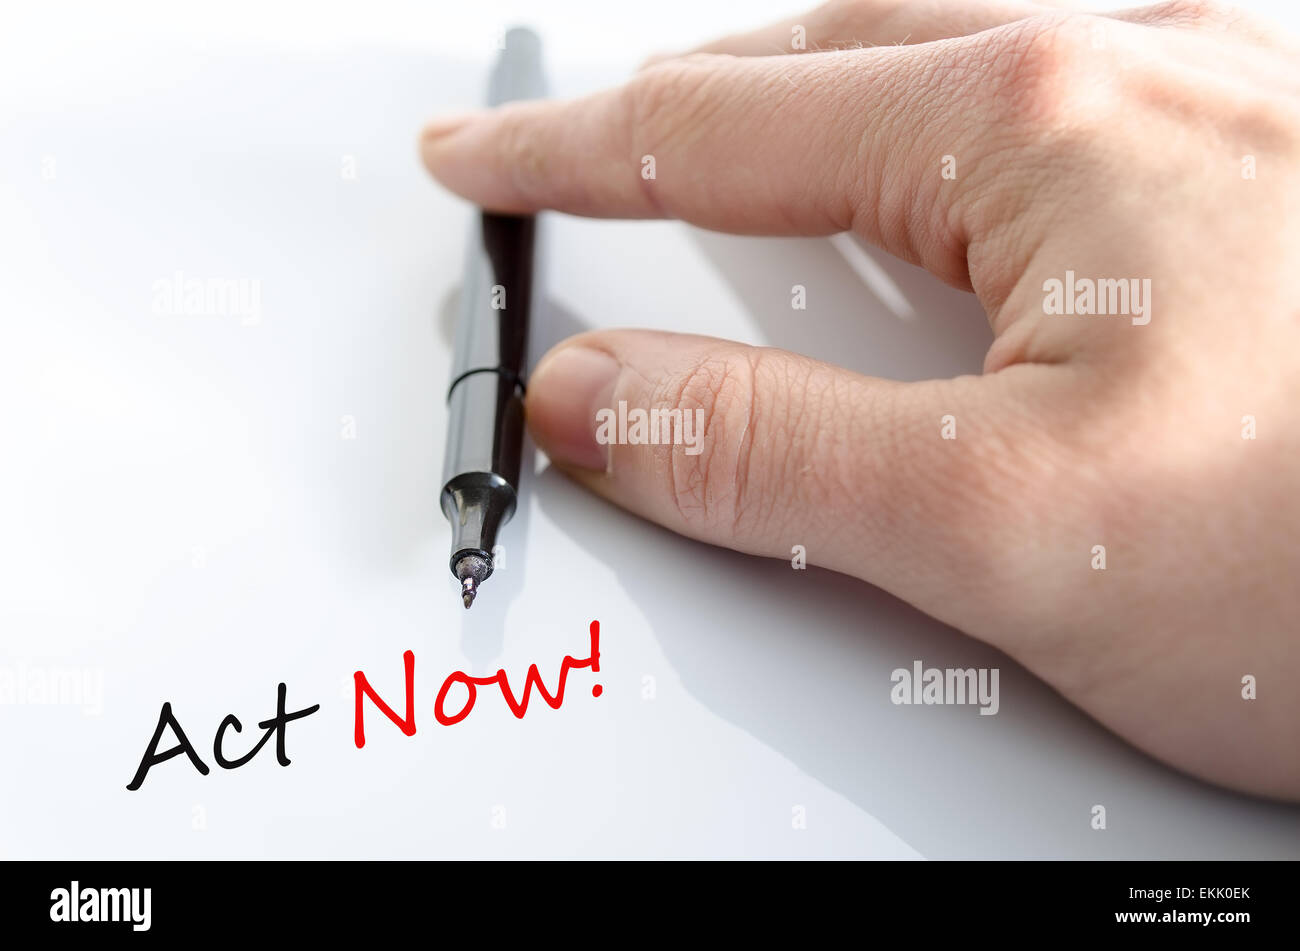 Act Now Concept Isolated Over White Background Stock Photo